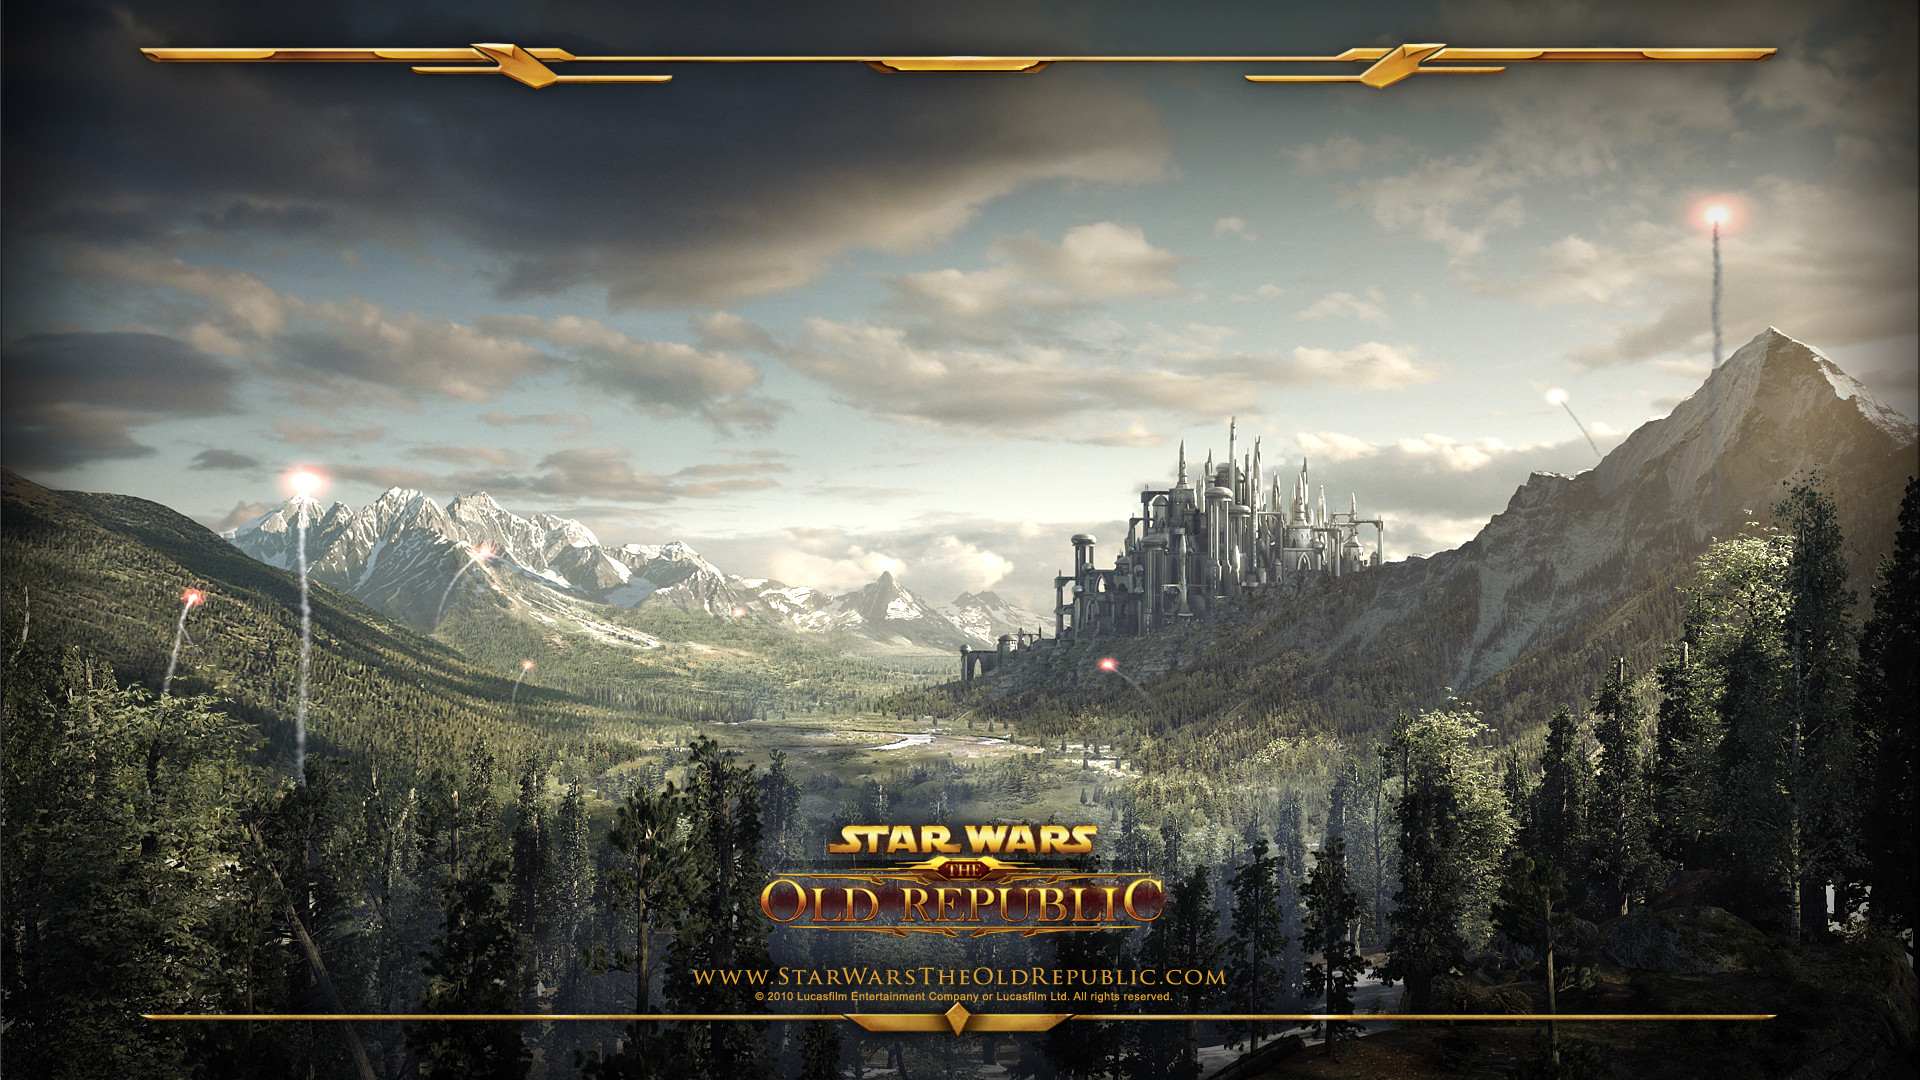 1920x1080 Swtor Wallpapers | Star Wars: The Old Republig Blog Fansite